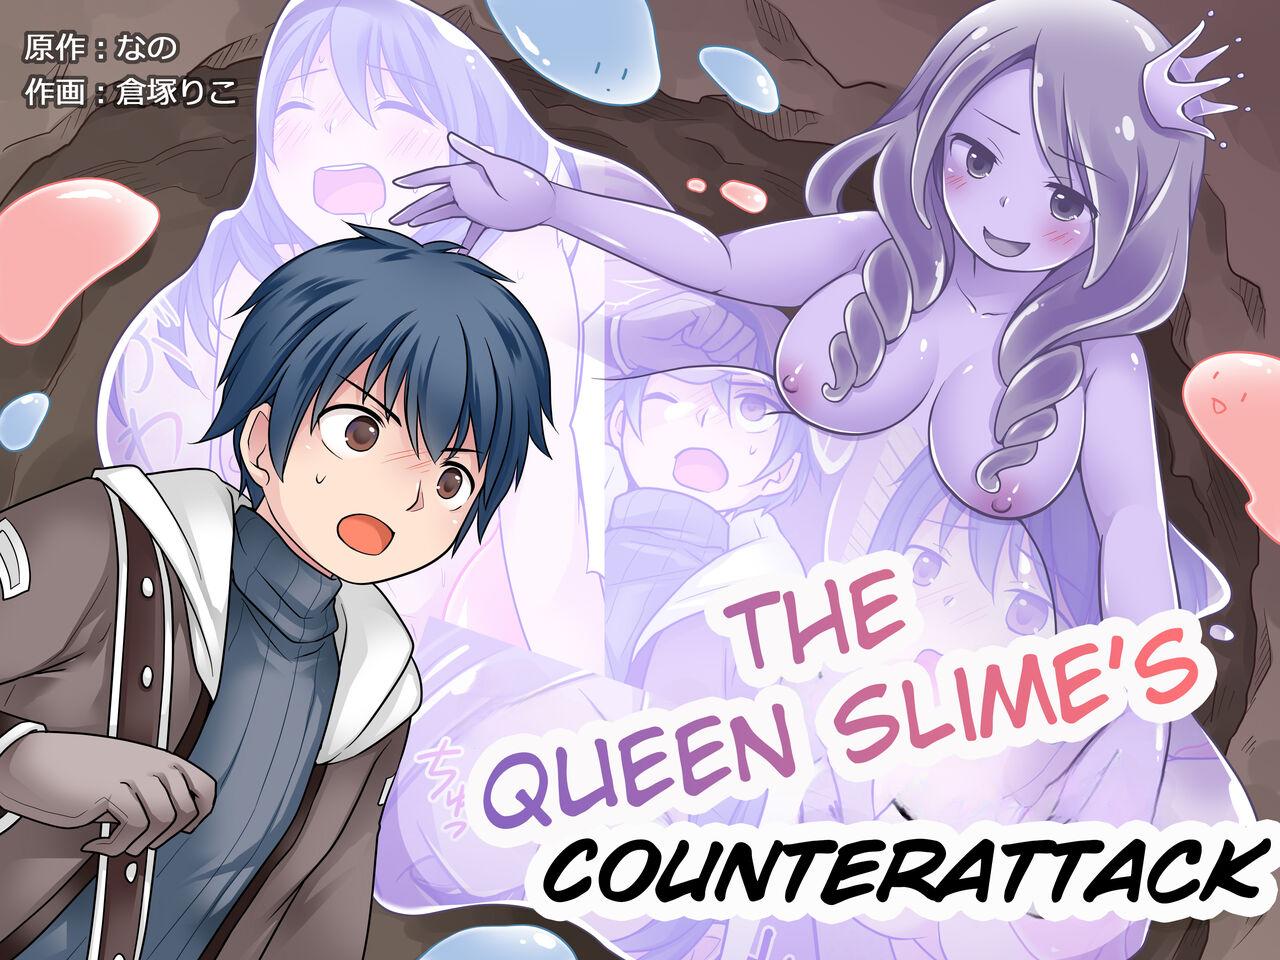 Phat Queen Slime no Gyakushuu | The Queen Slime's Counterattack - Original Thylinh - Picture 1